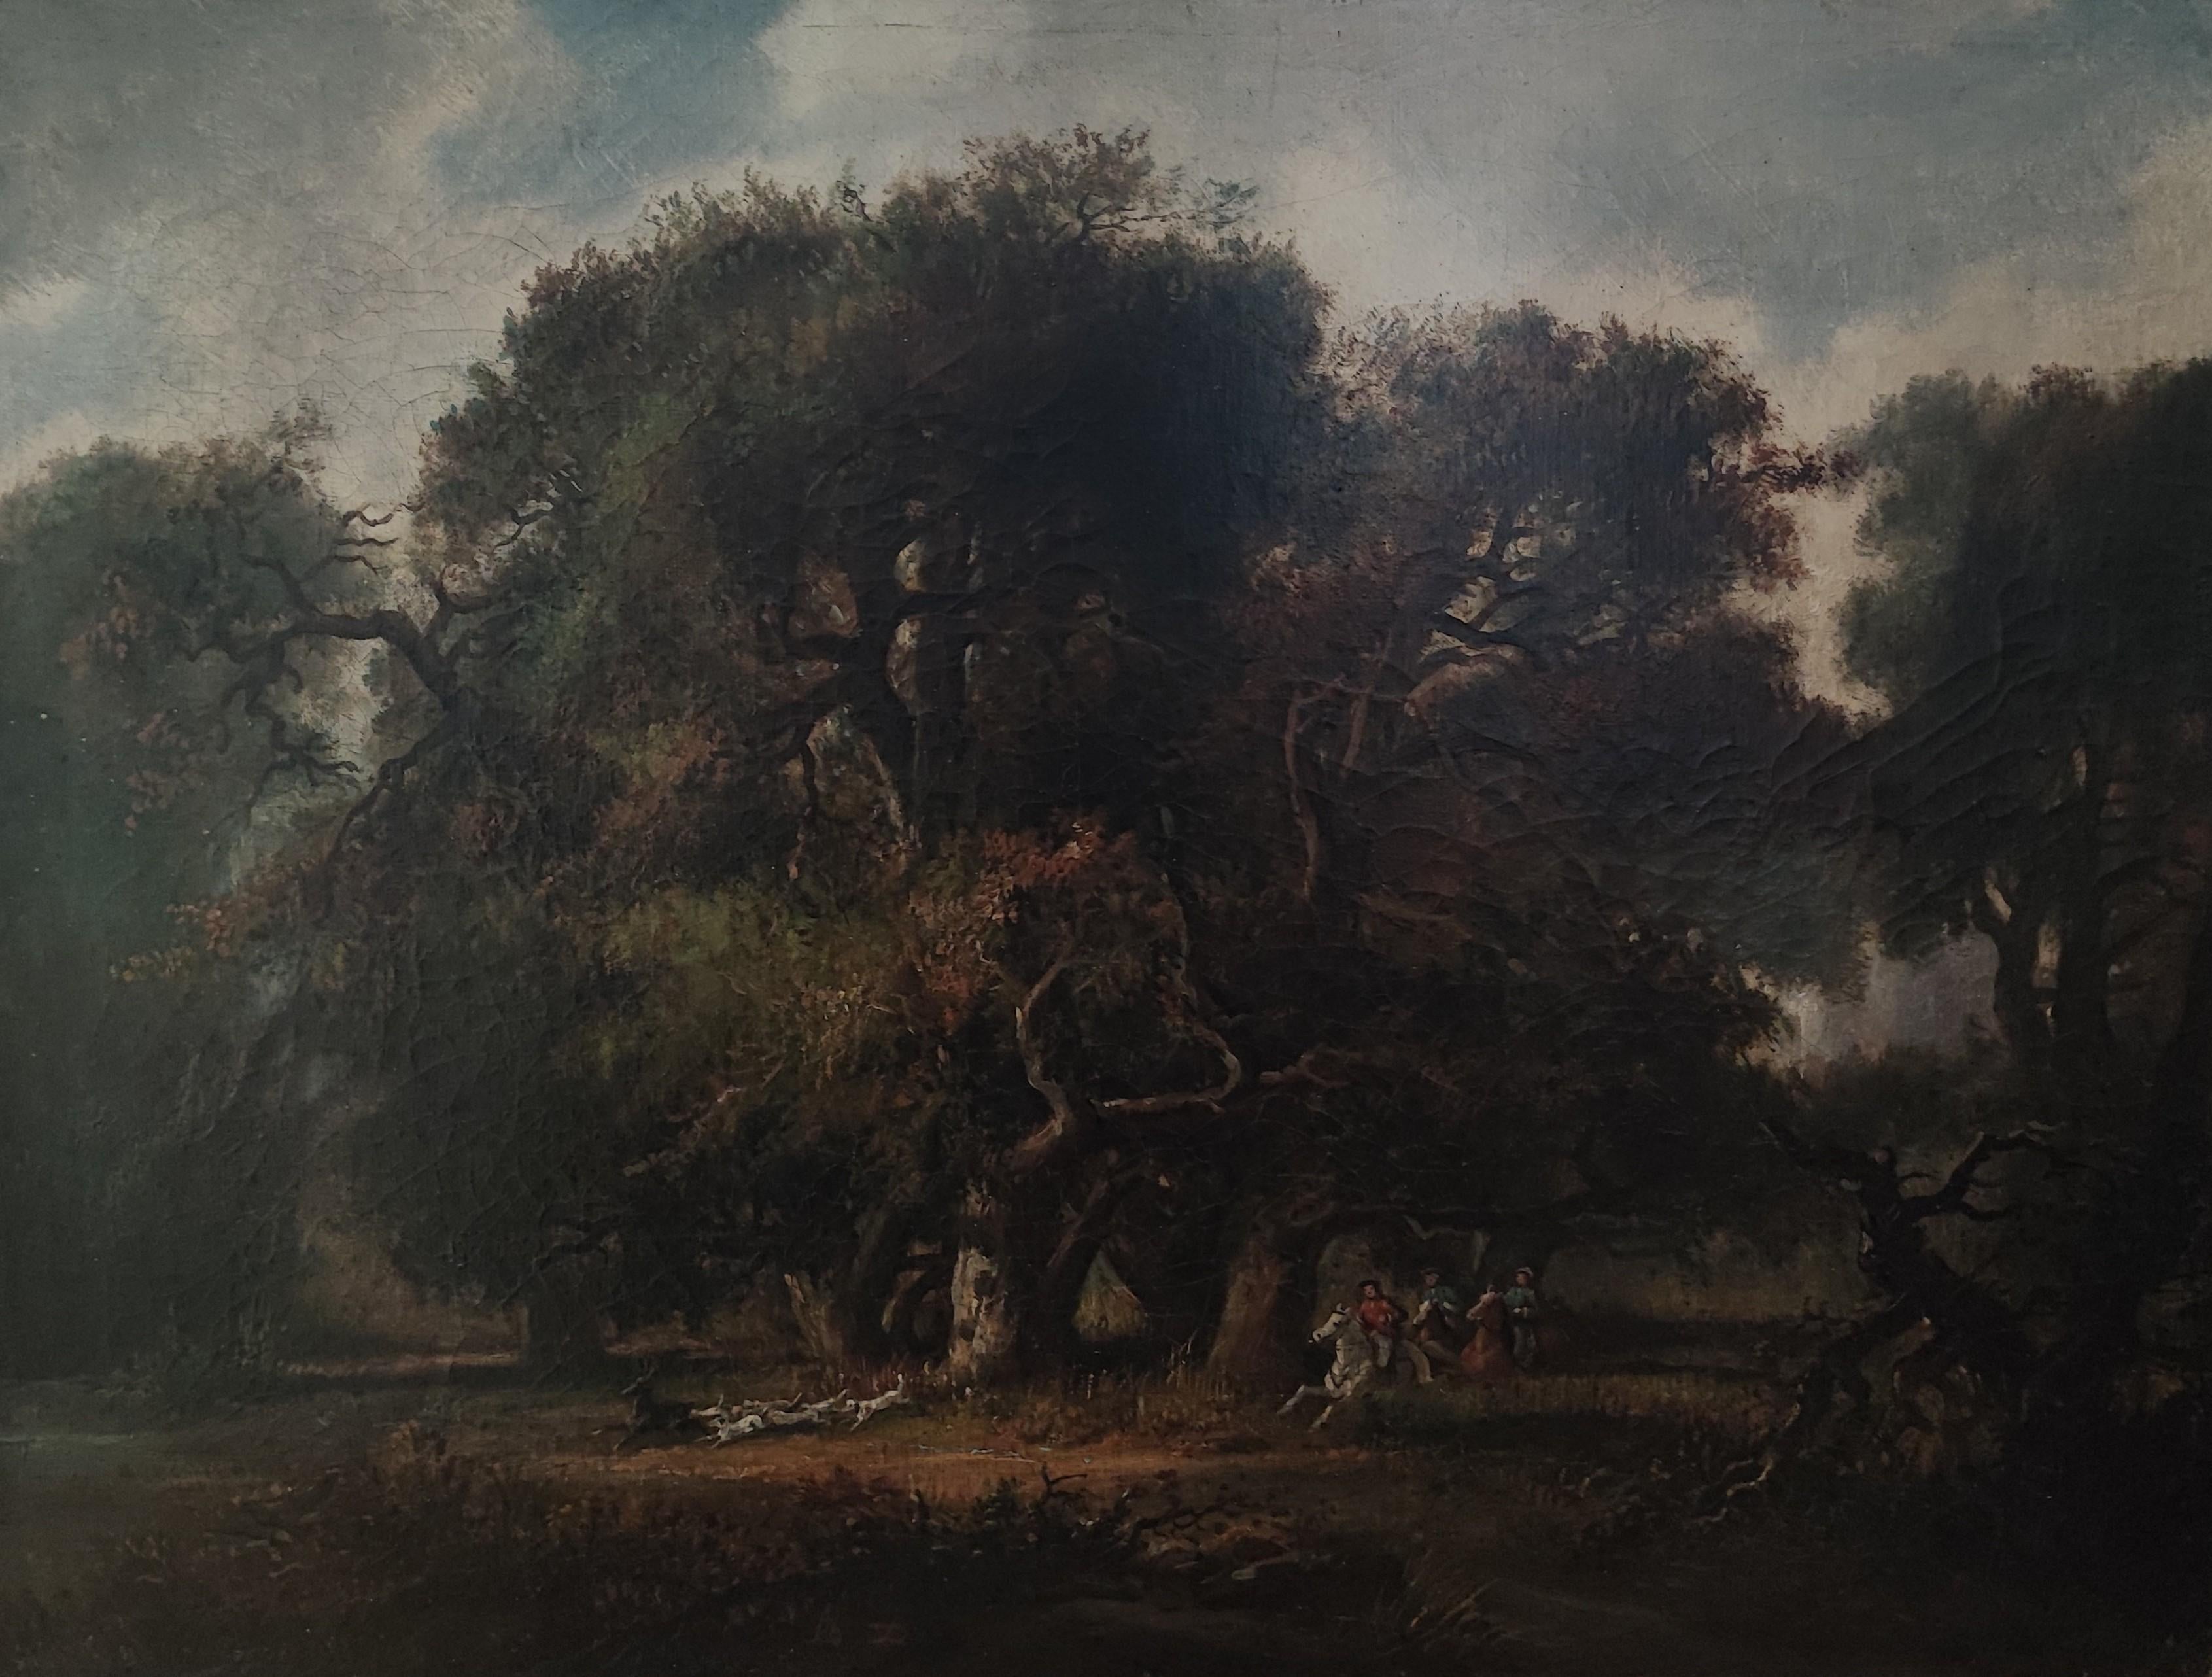 Unknown Landscape Painting - Woodland Landscape with Horses and Riders